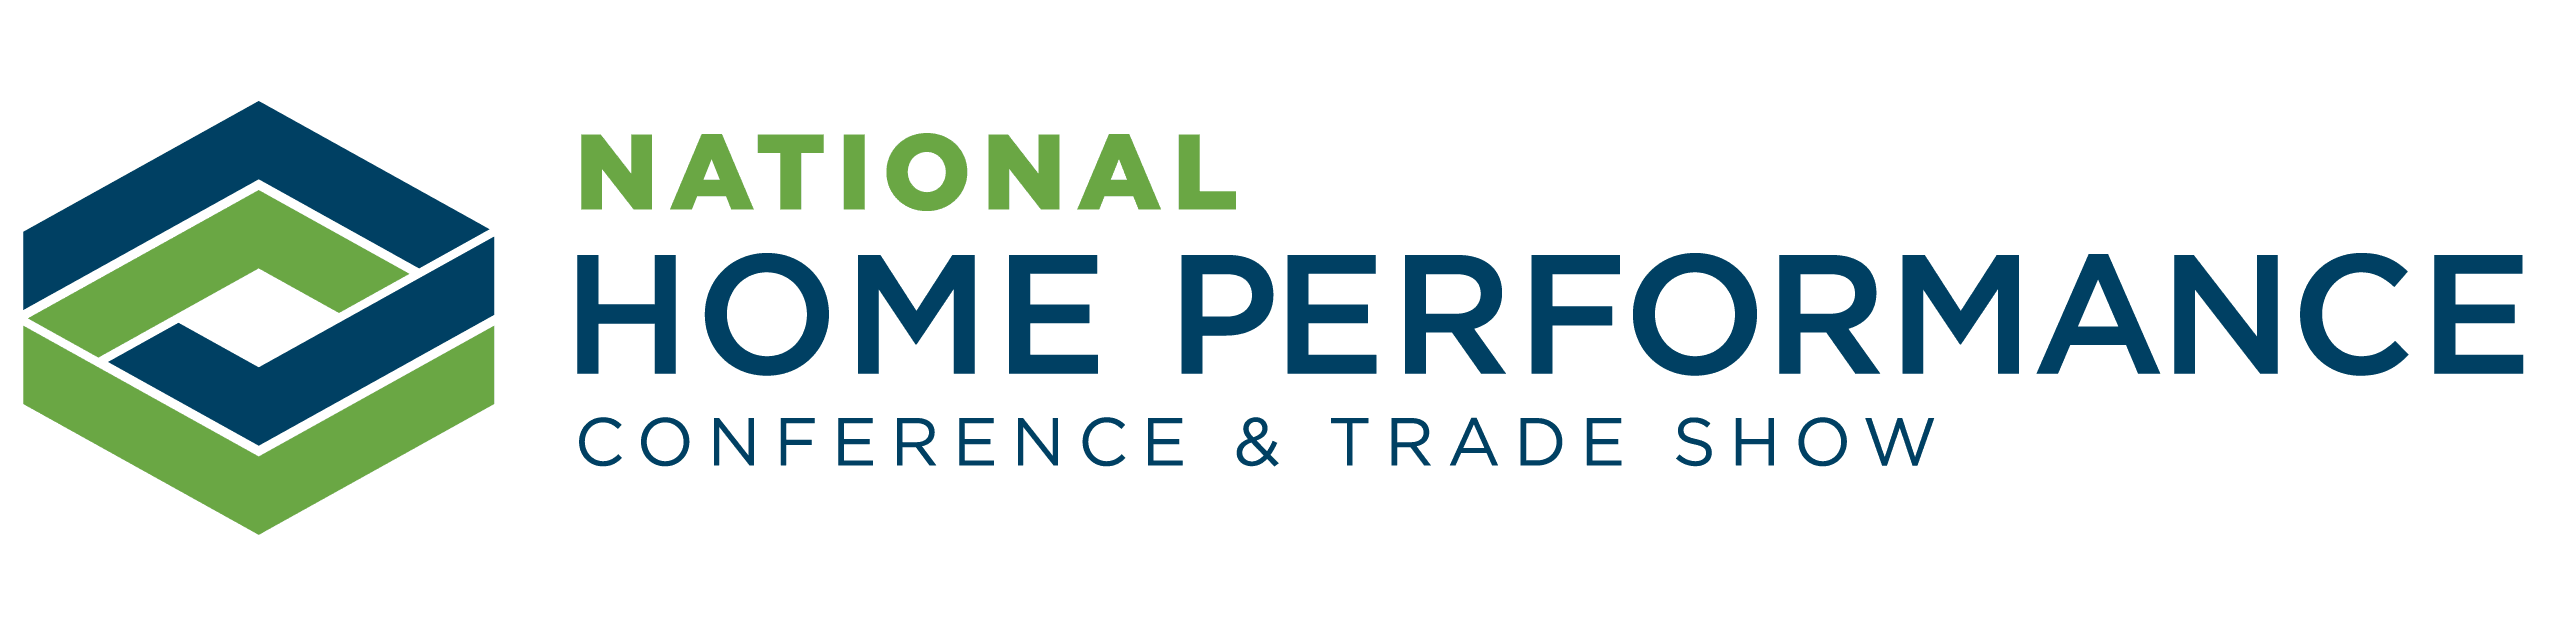 Building Performance Association National Home Performance Conference & Trade Show logo